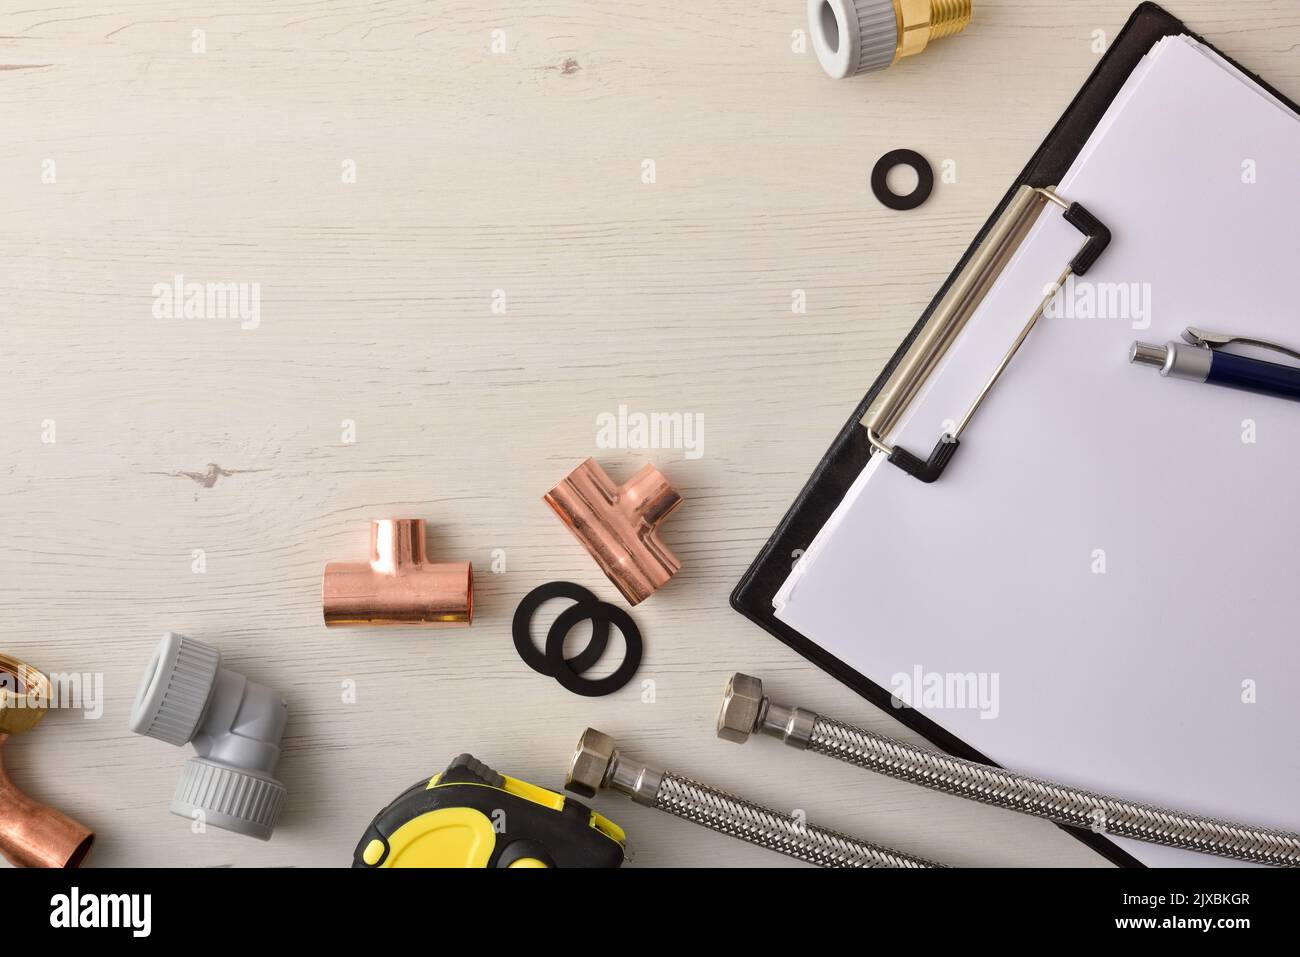 Plumbing material inventory and sale concept with notepad and material on a white wooden table. Top view. Horizontal composition. Stock Photo